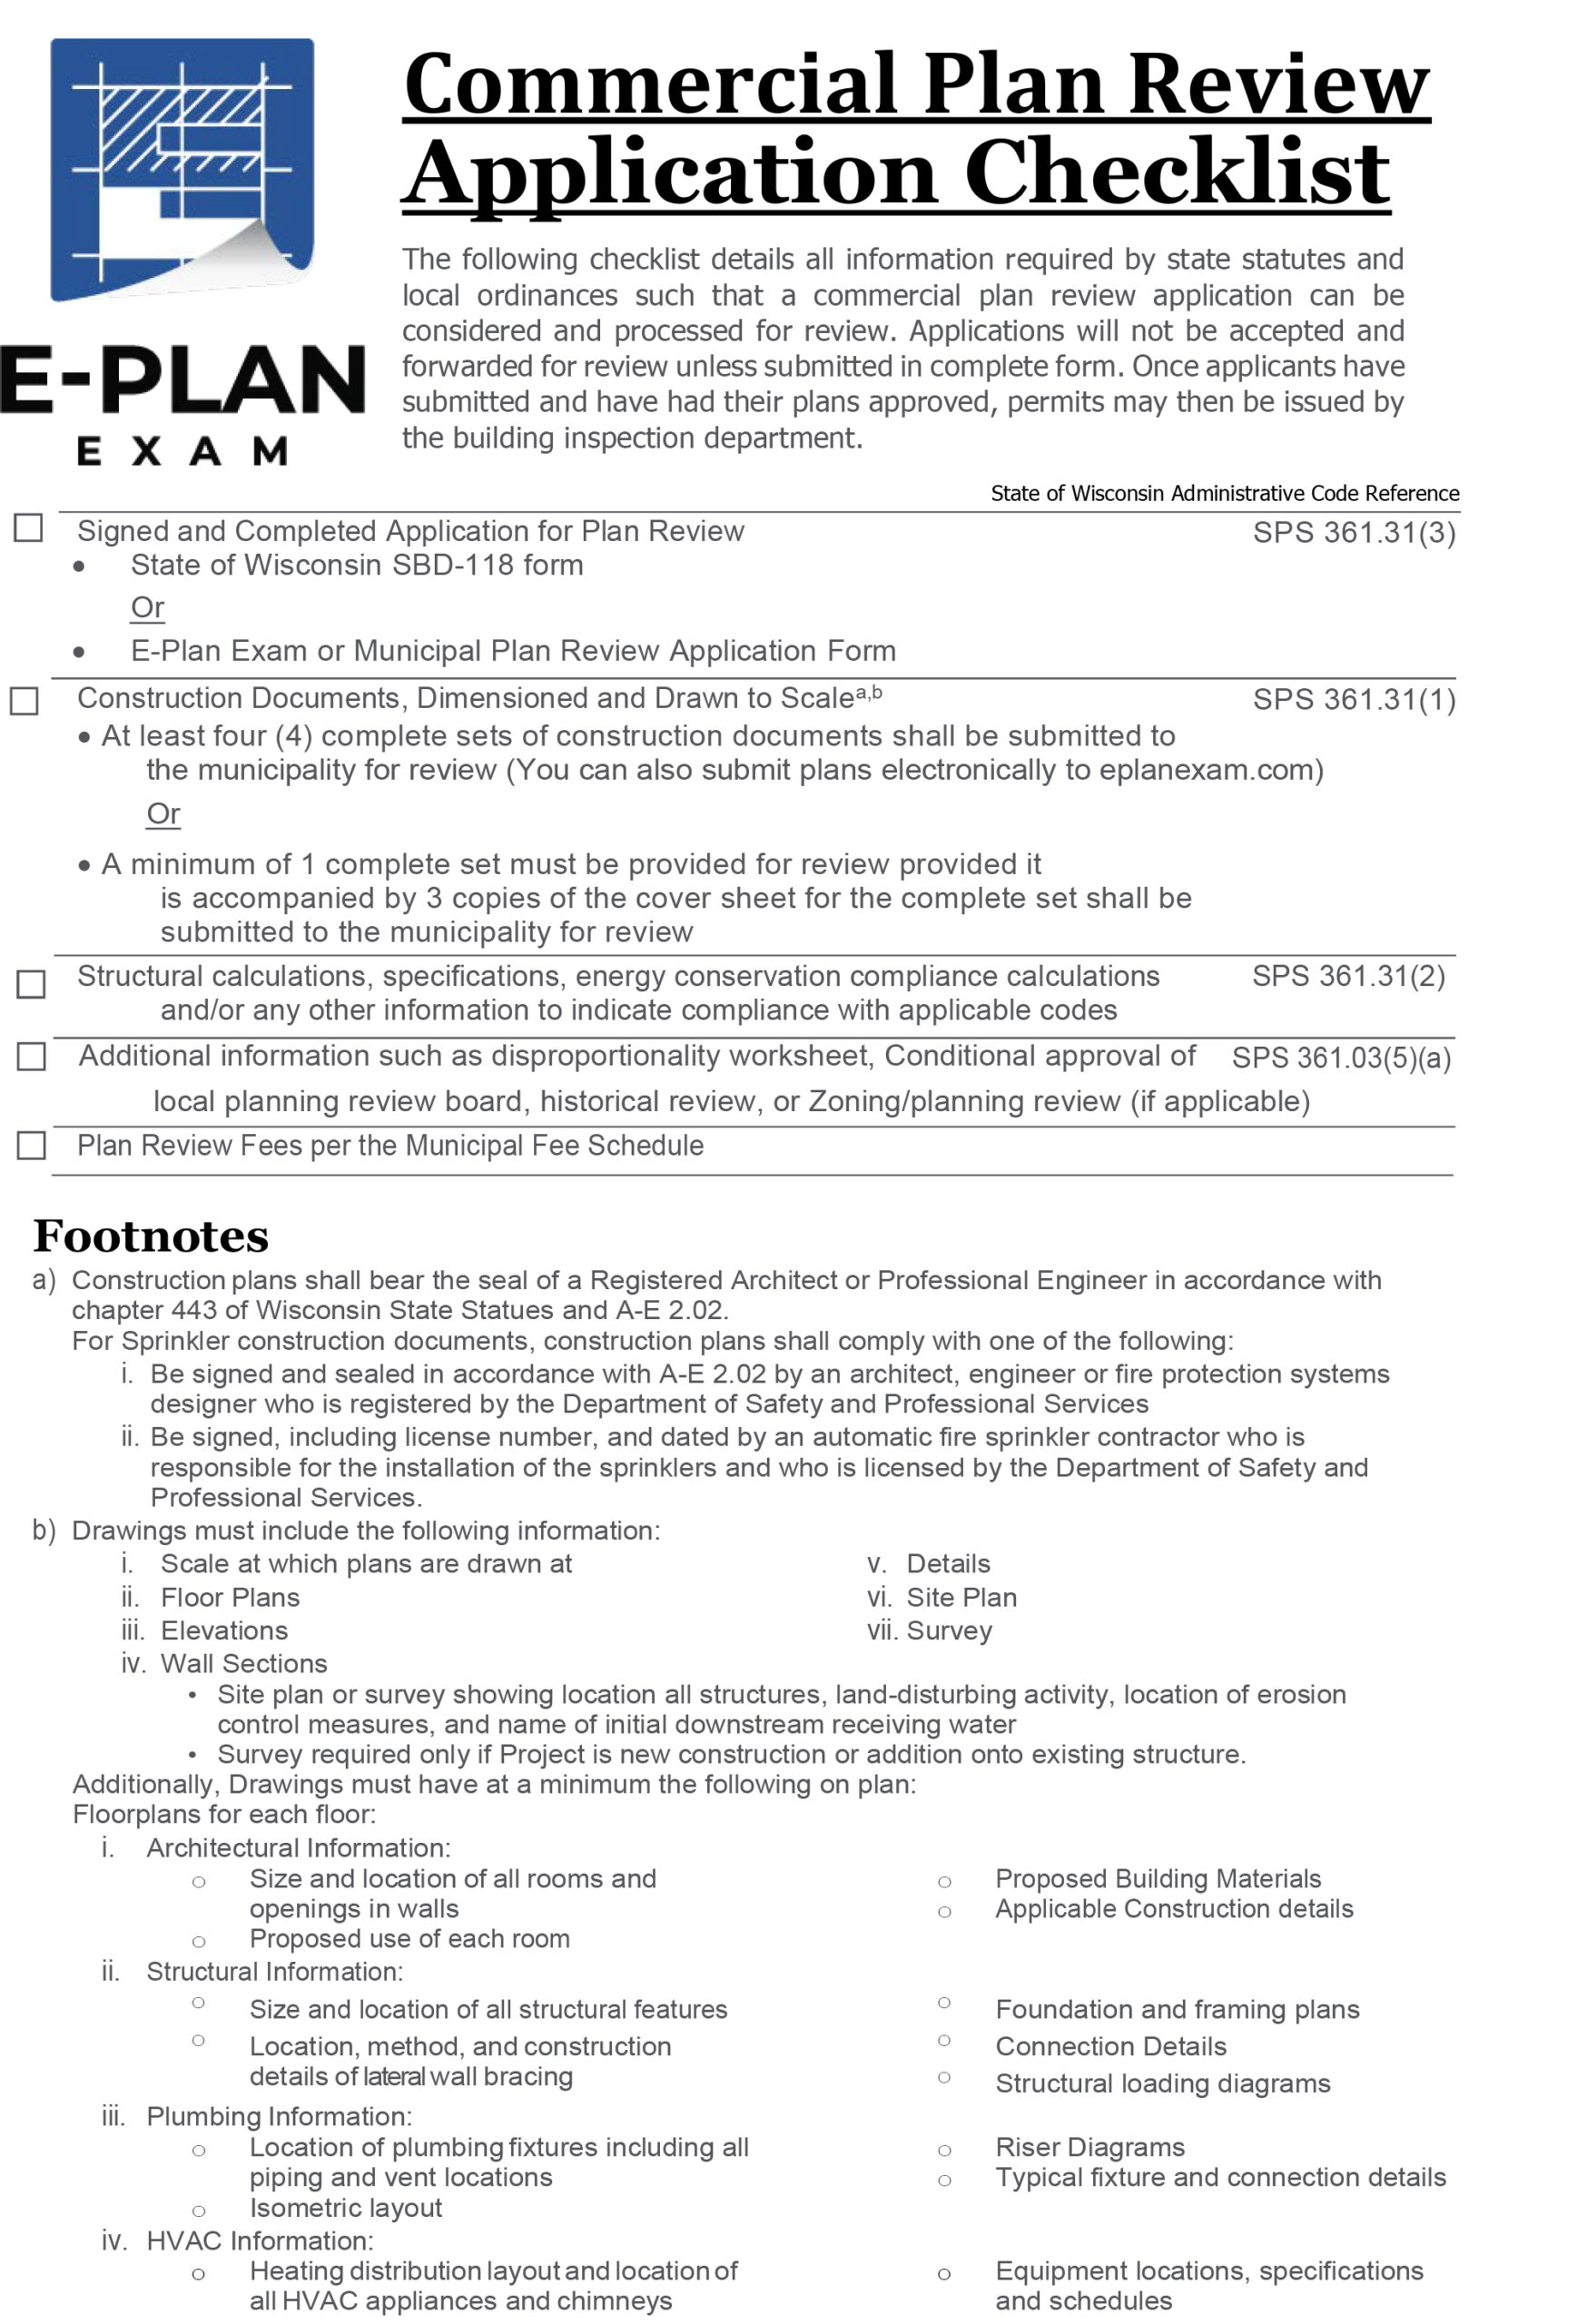 Commercial Plan Review Application Checklist